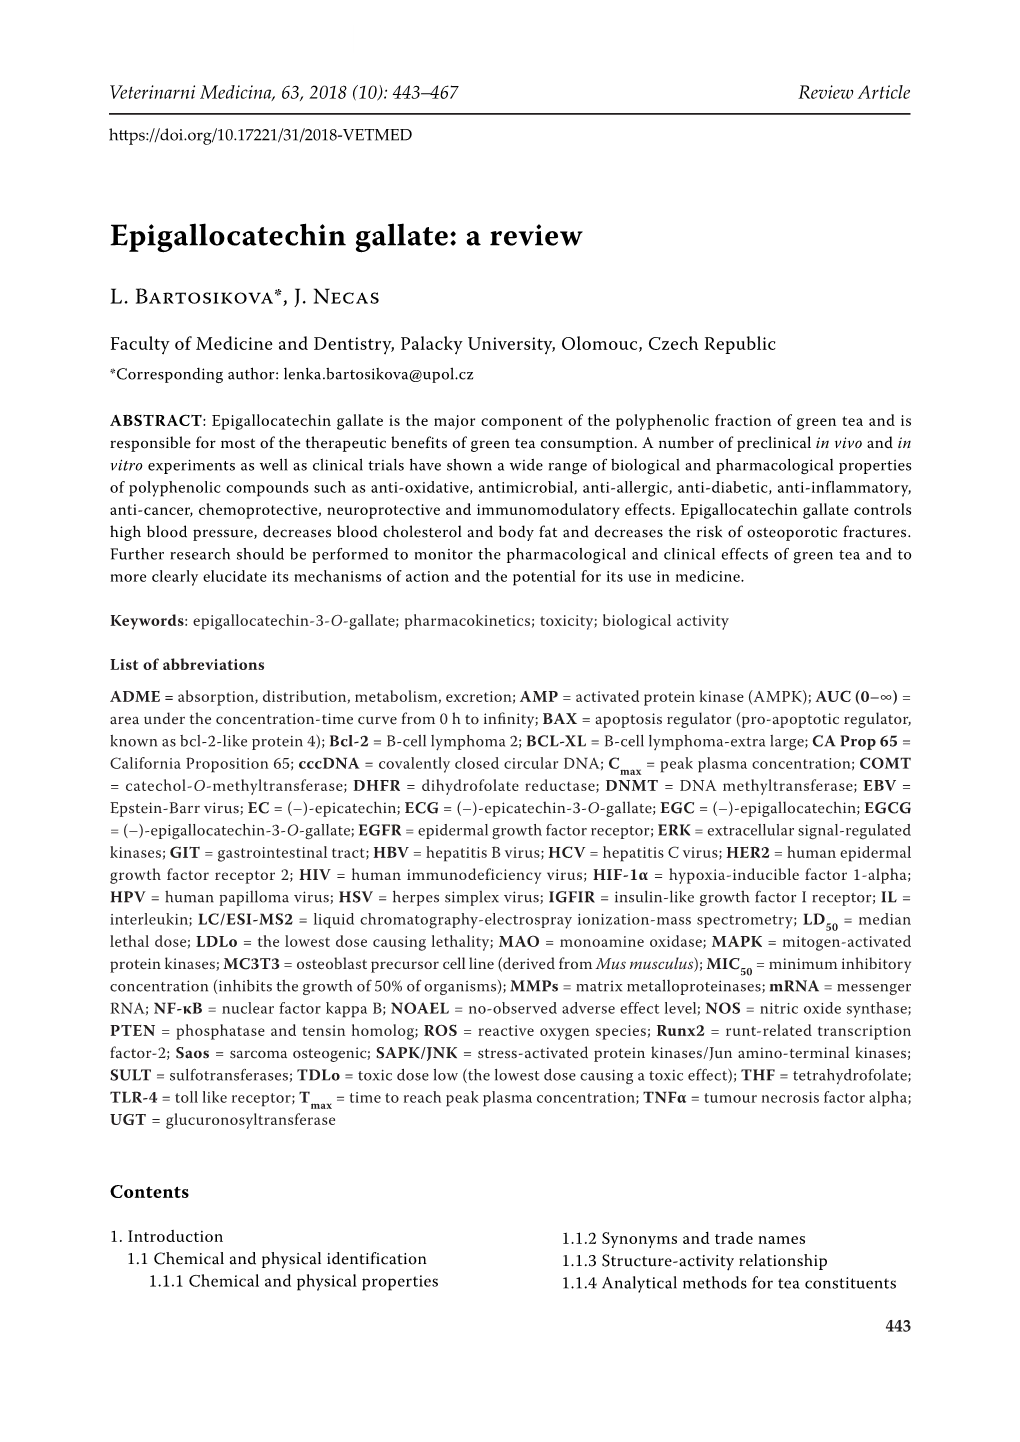 Epigallocatechin Gallate: a Review